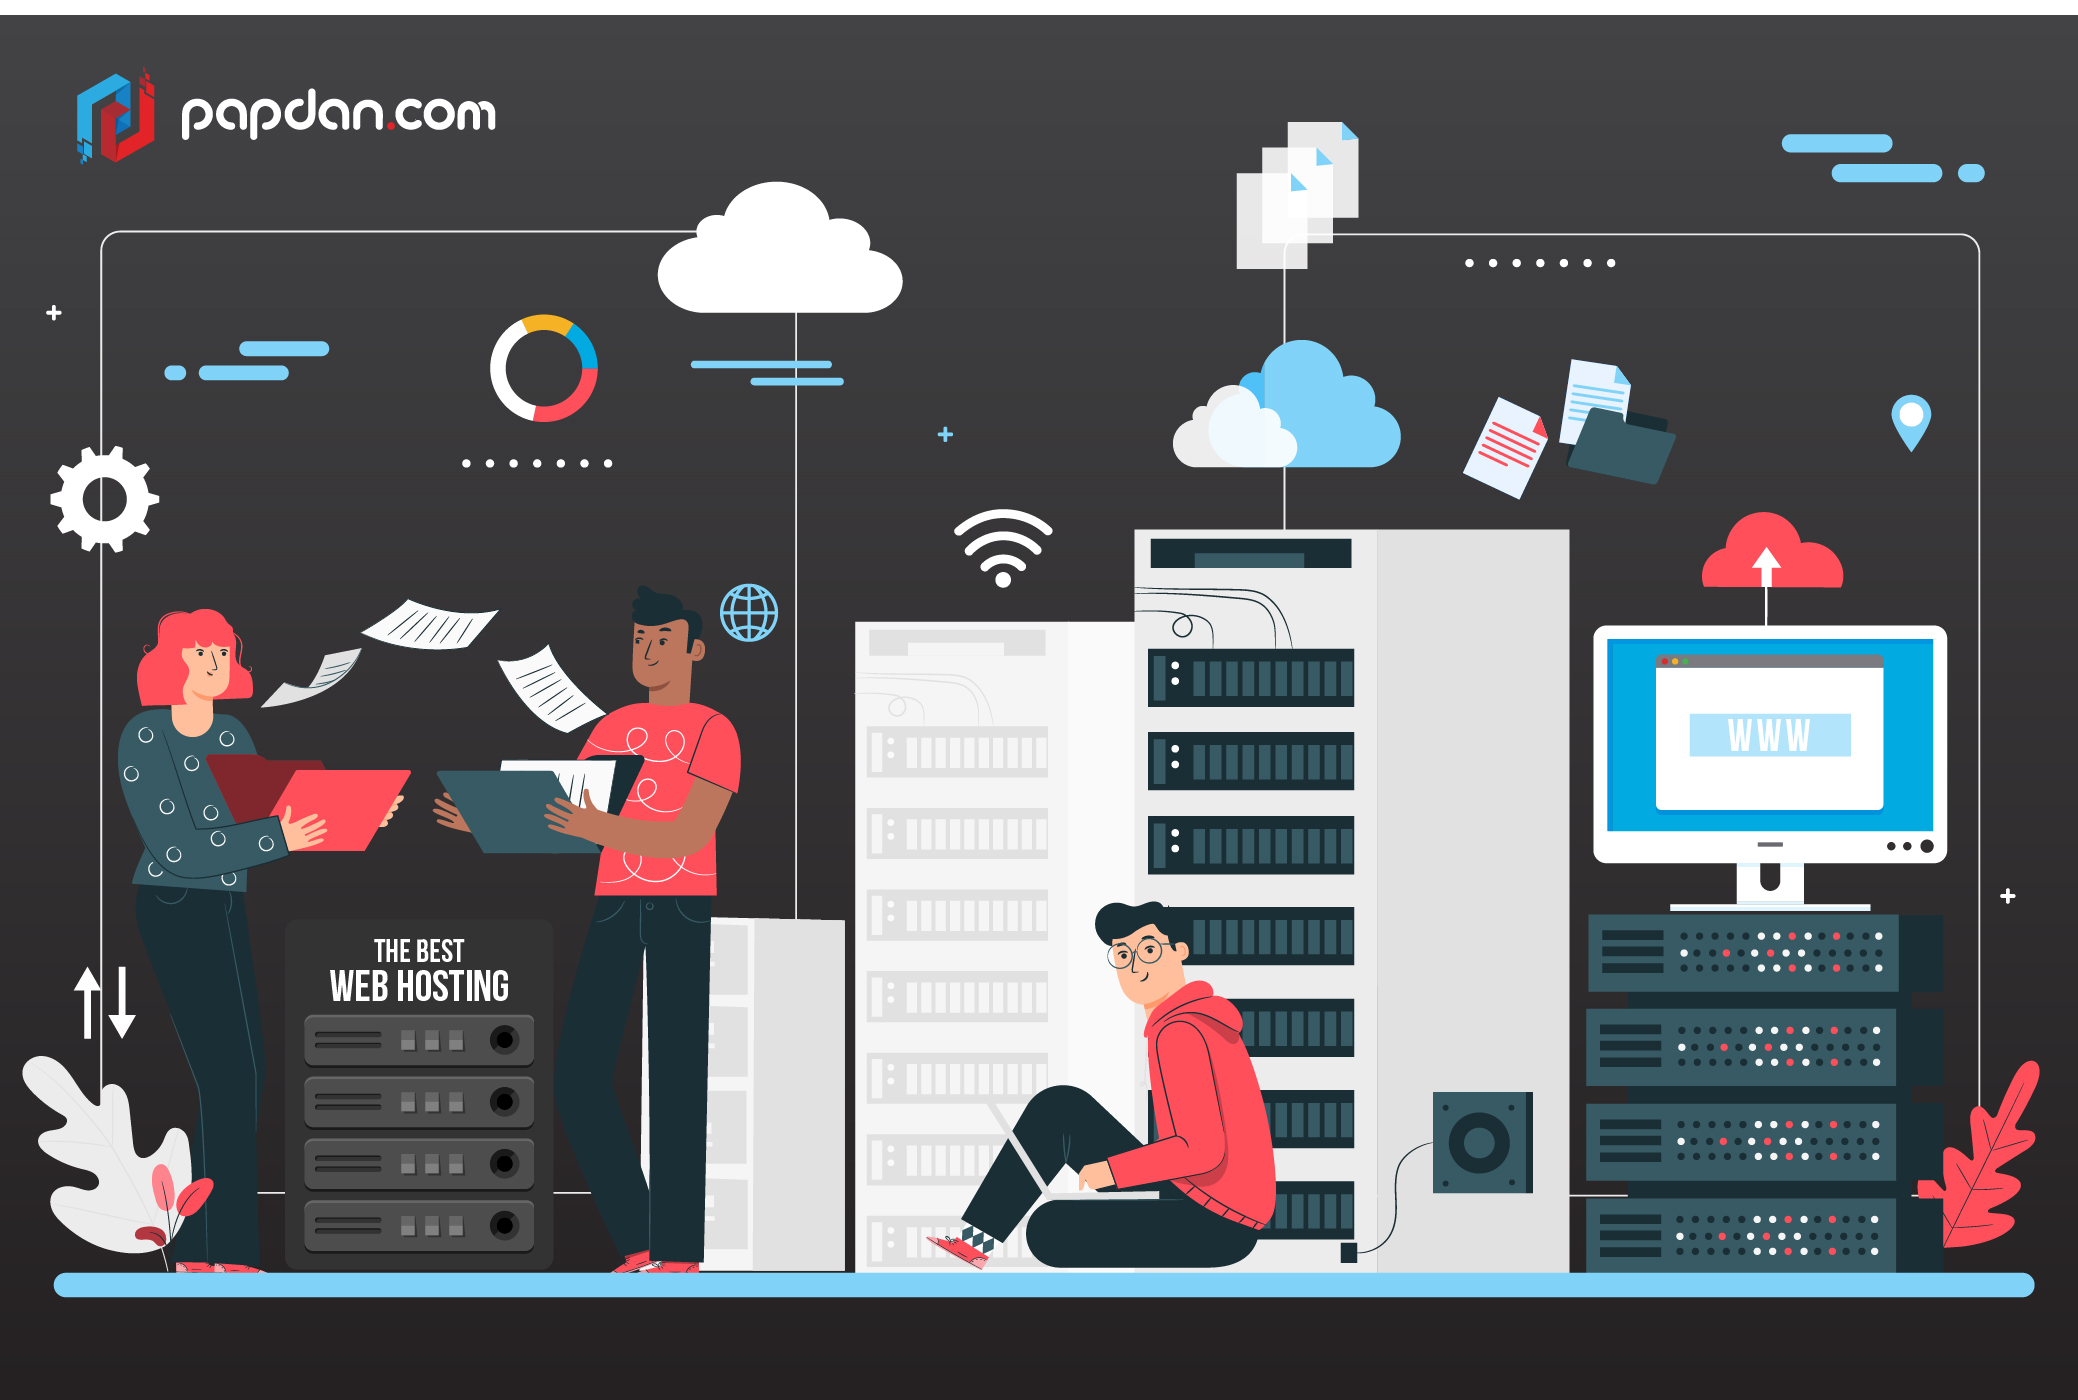 The Right Web Hosting Type for Small Businesses in 2020